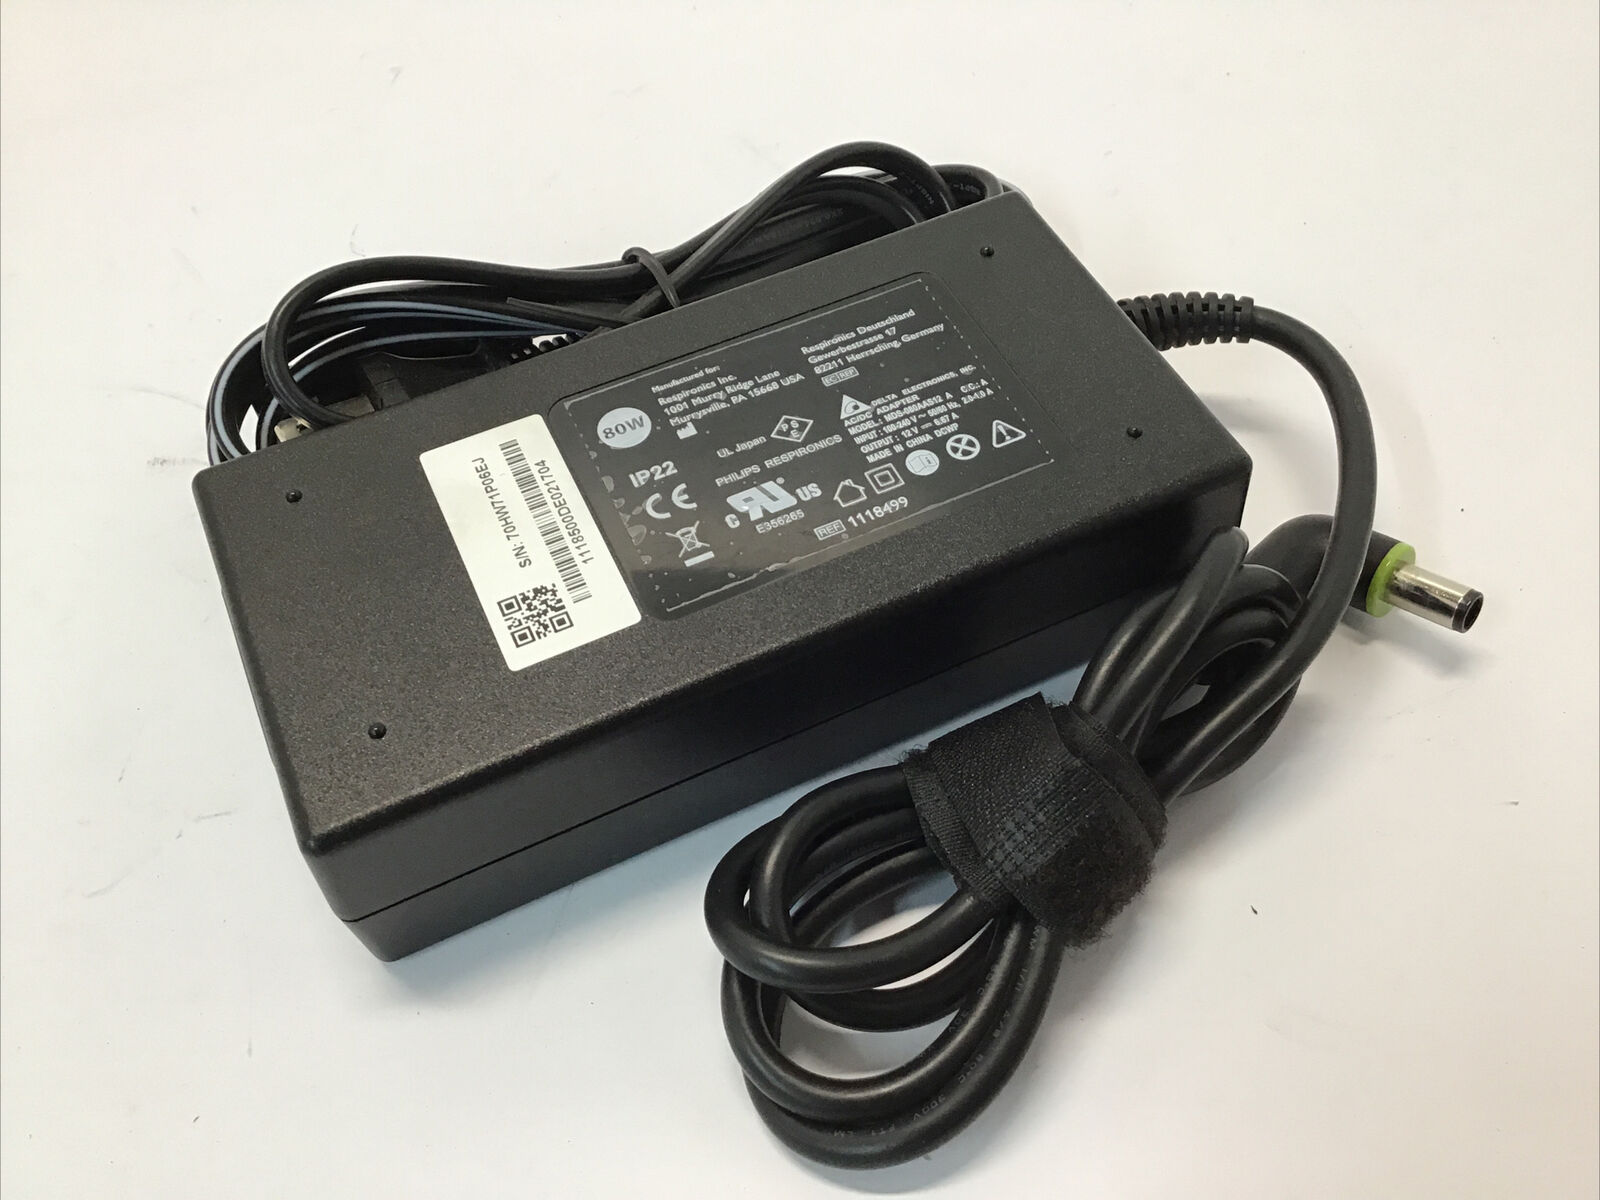 Philips Respironics 80W AC Power Supply Adapter 12V 6.67A CPAP MDS-080AAS12 A Seller notes “R2 / Ready for resale. Grad